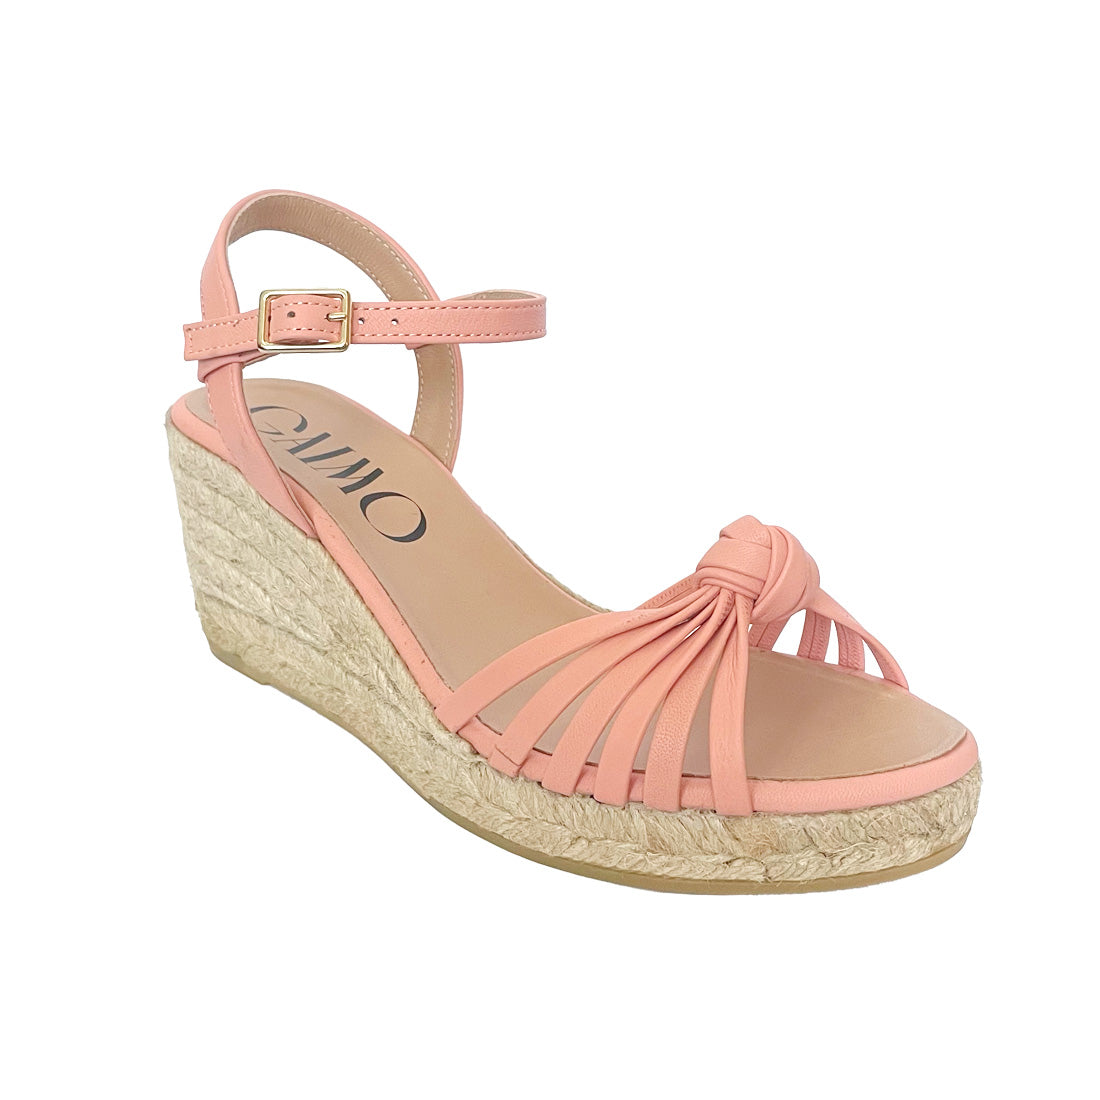 Pink salmon espadrilles wedges sandals  handcrafted comfortable shoes in leather